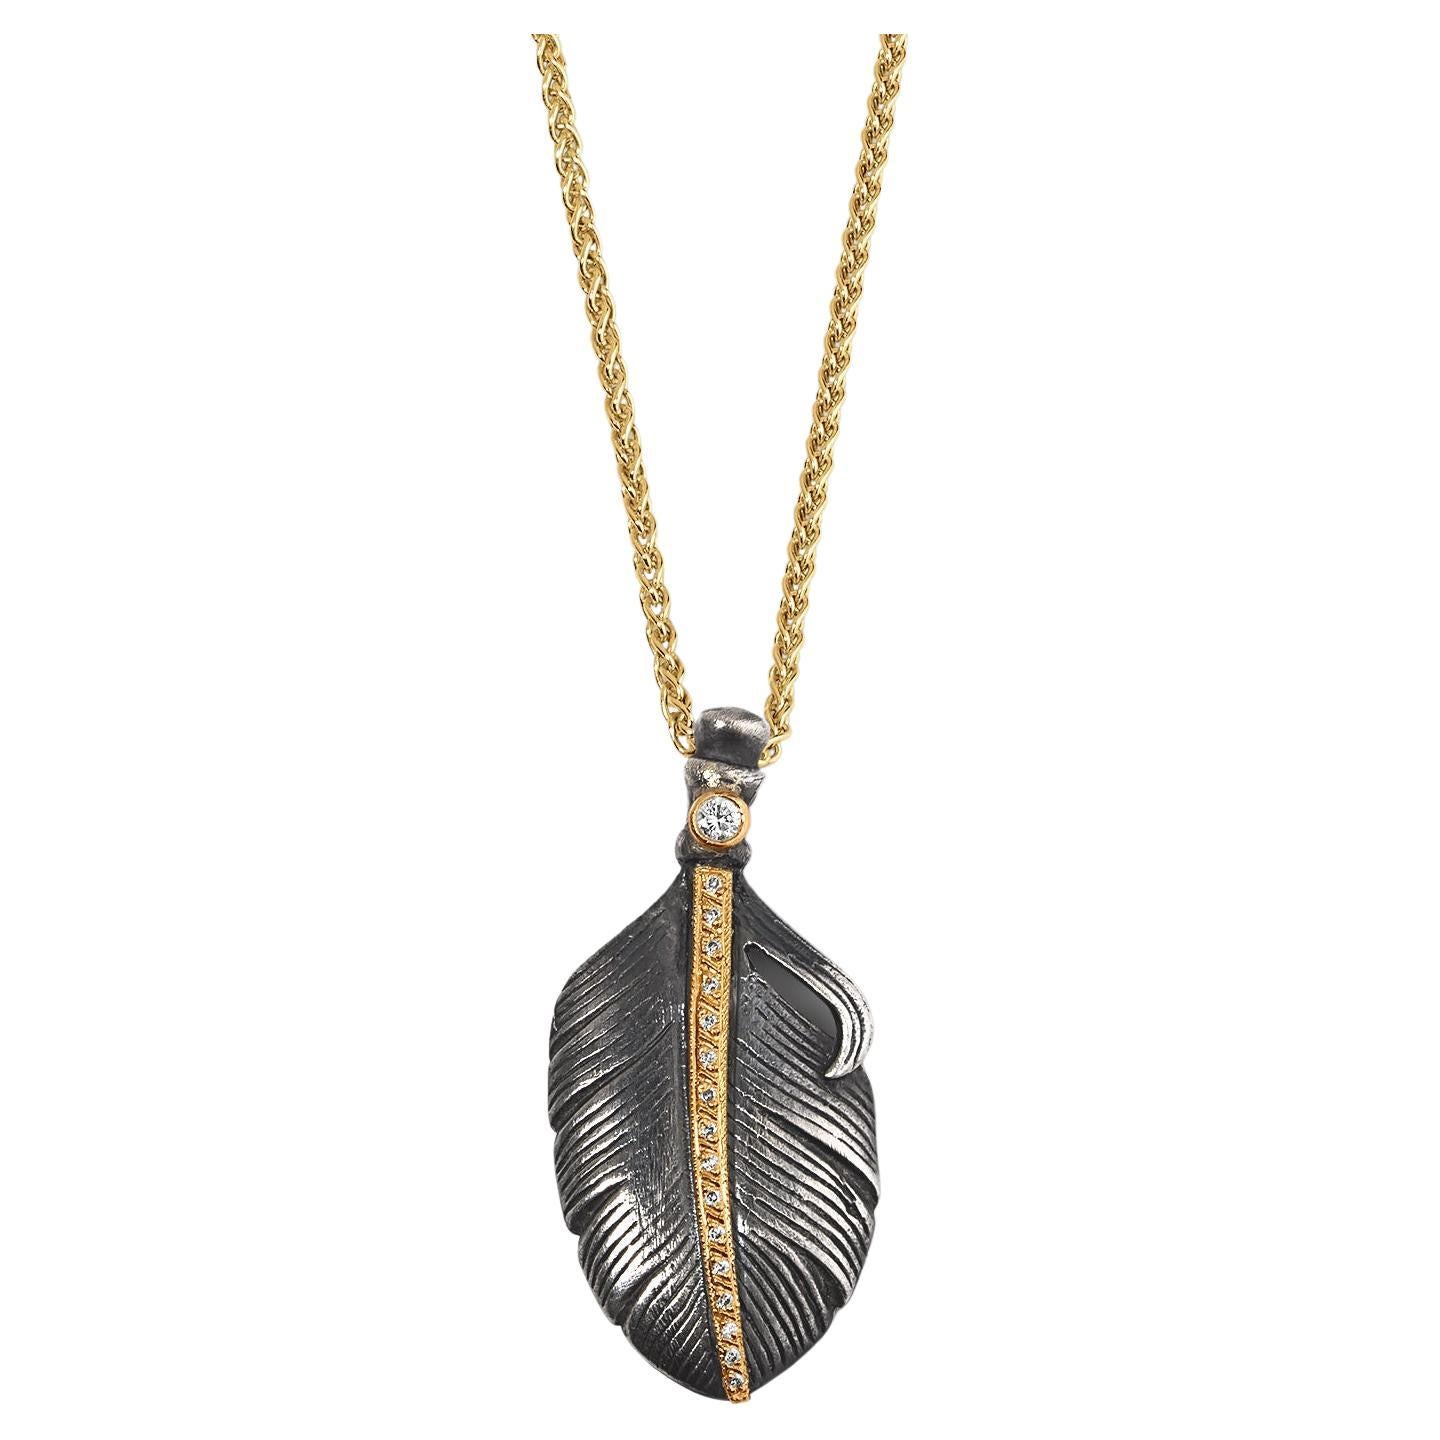 Feather with Diamonds, Charm Pendant Necklace, 24kt Gold and Silver